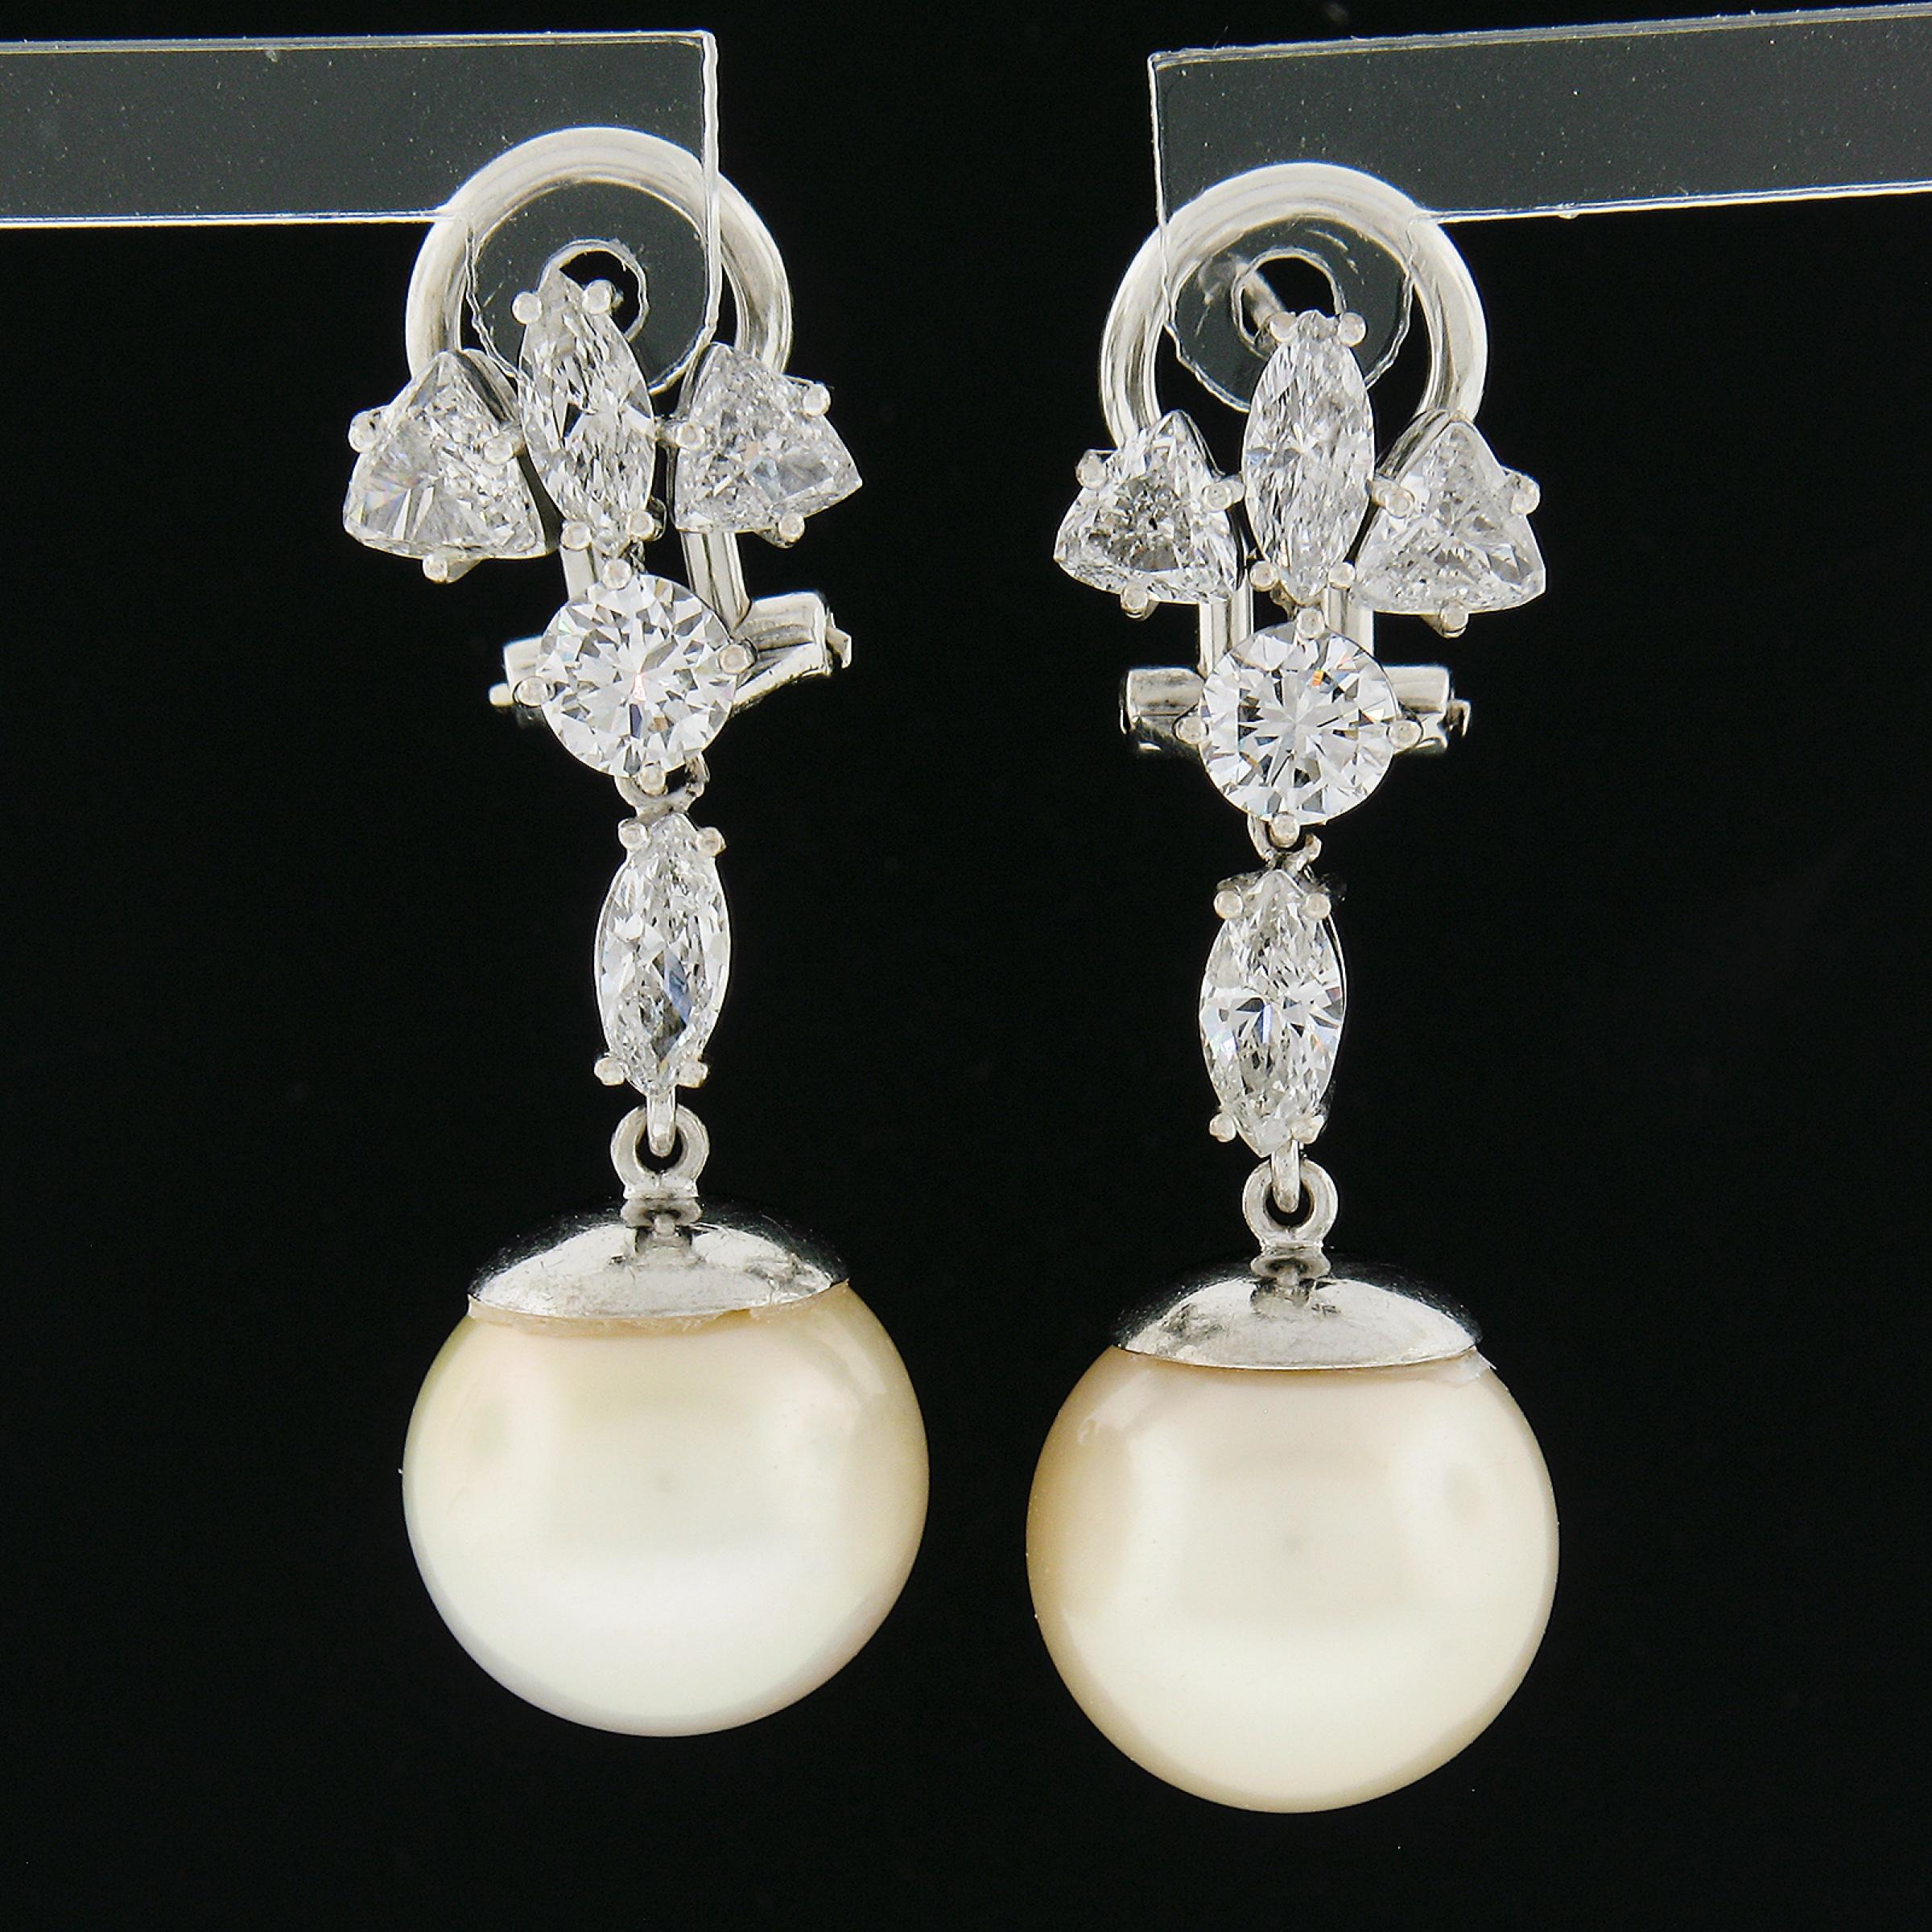 This magnificent pair of dangle drop statement earrings was crafted from solid 14k  white gold. They each feature a very large, GIA certified, saltwater cultured pearl at their dangle, toped by a high fine quality trillion, marquise & round